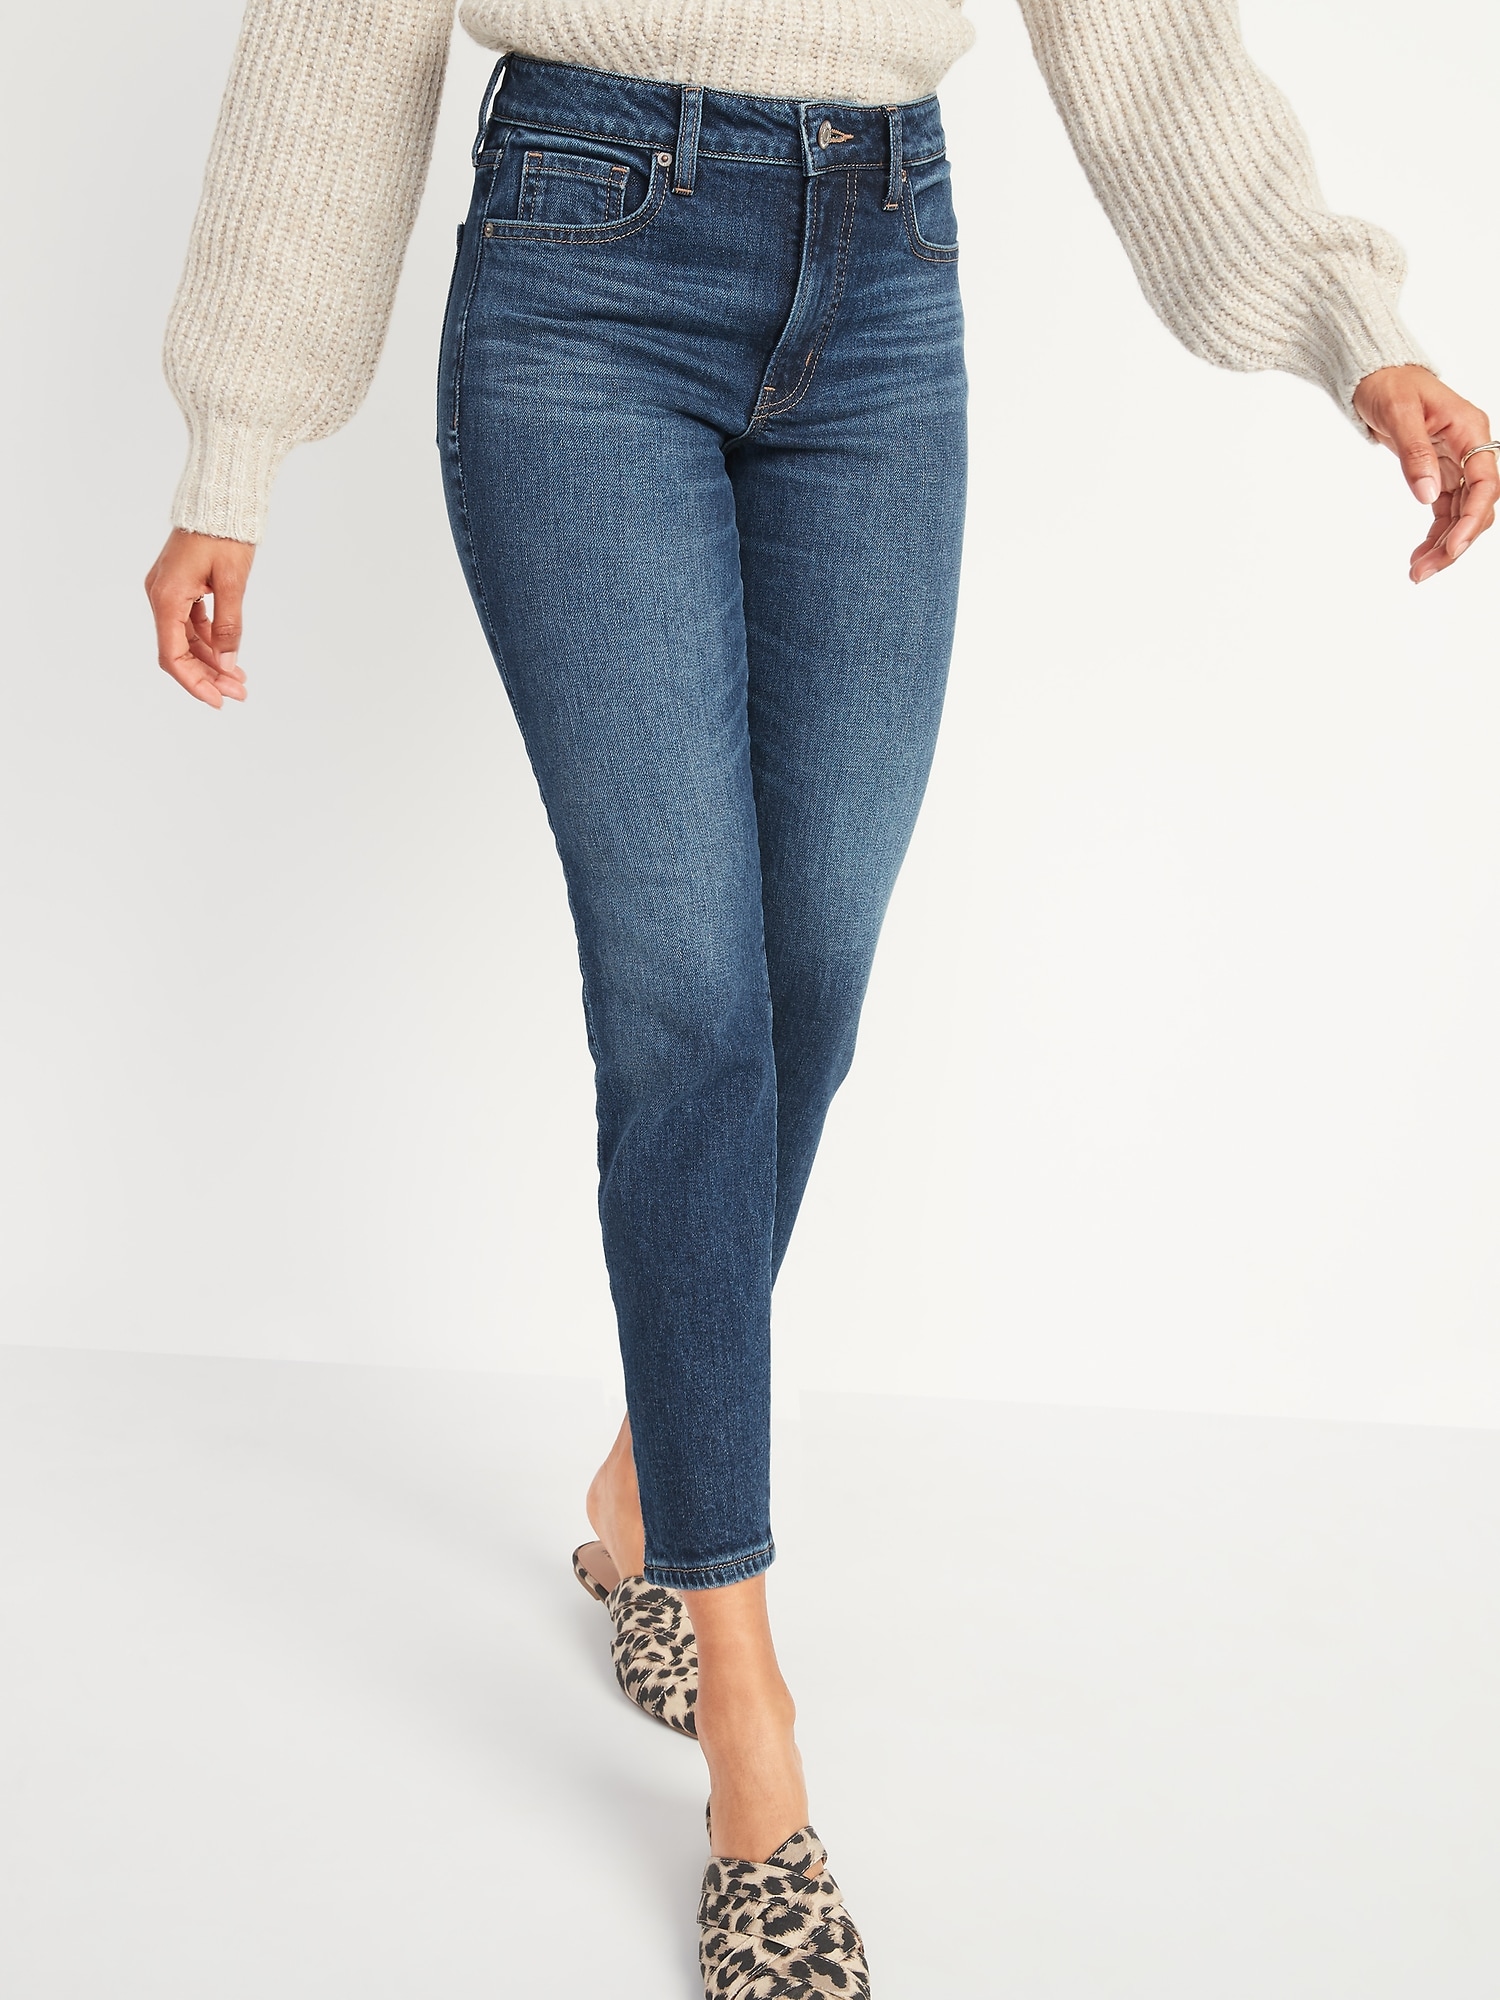 High-Waisted O.G. Straight Ankle Jeans for Women